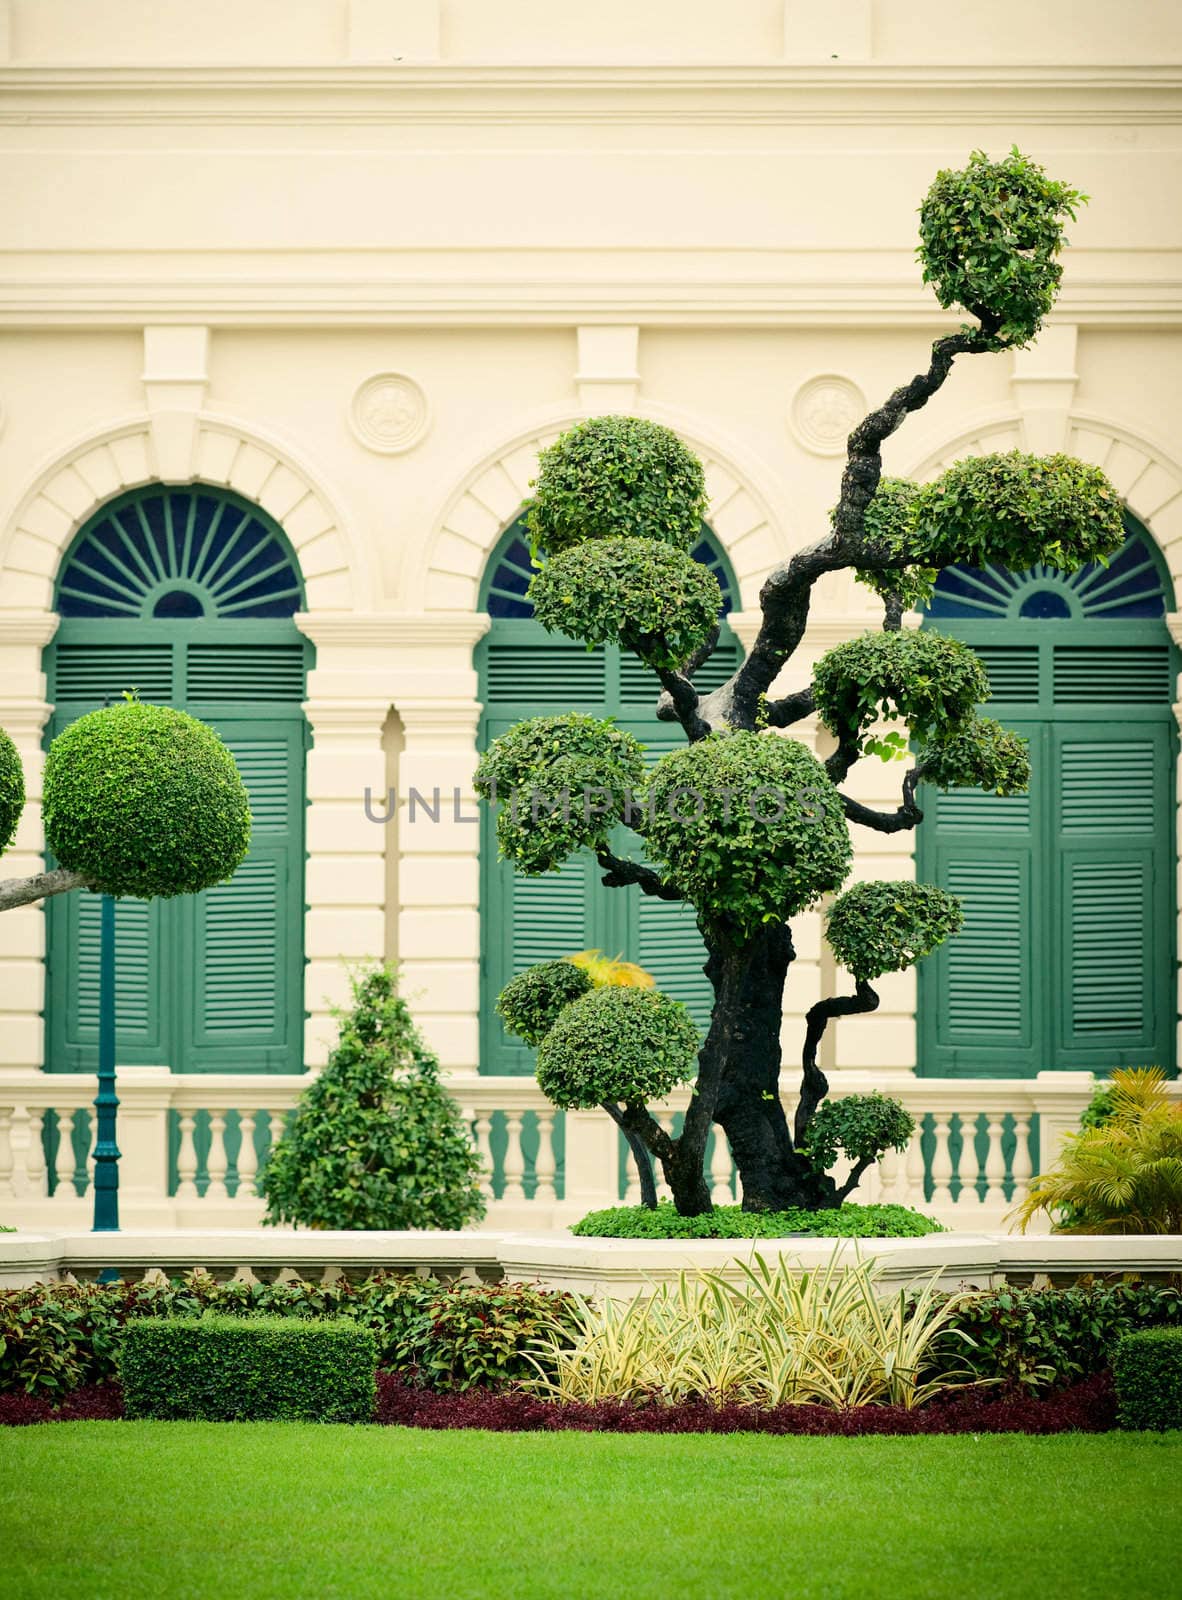 Lawn with decorative trees in Grand Palace, Bangkok, Thailand